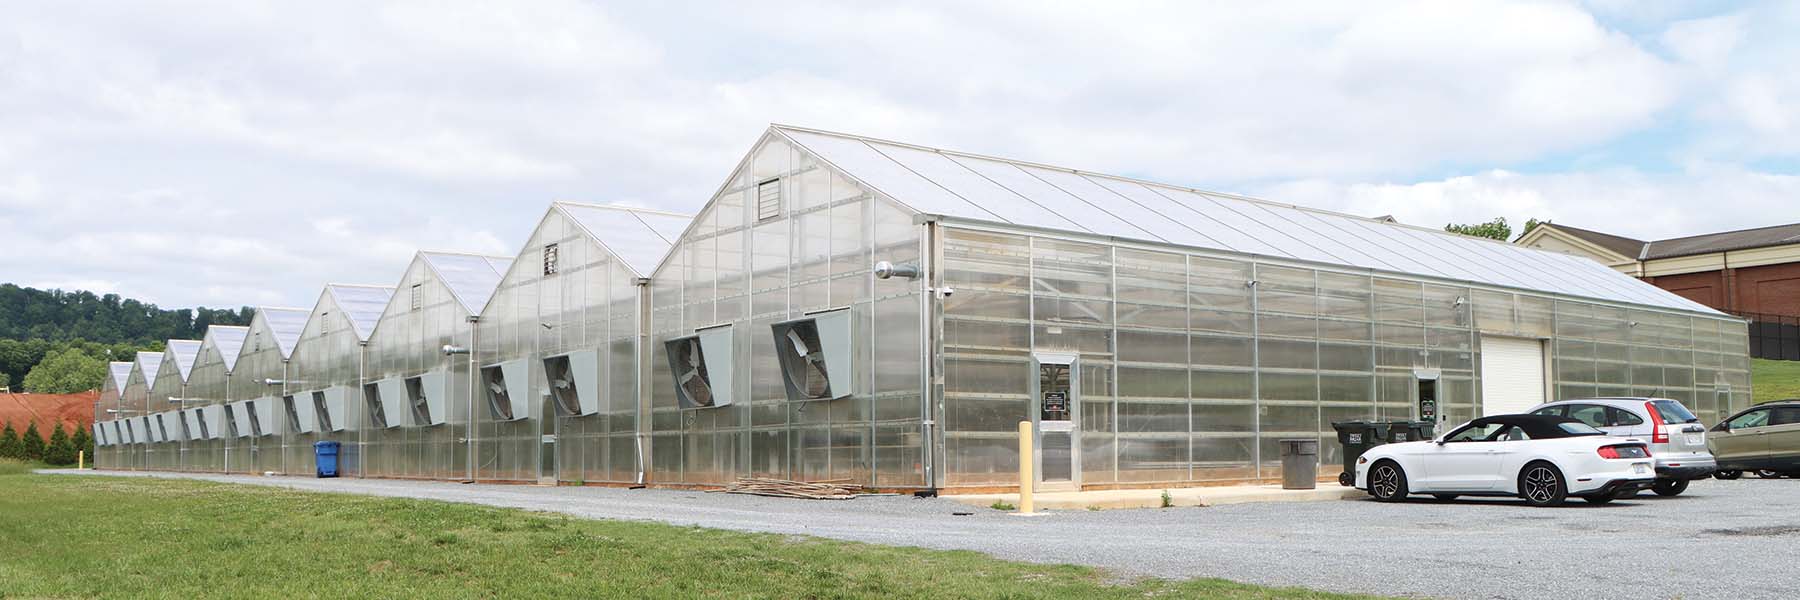 commercial cannabis greenhouse light deprivation